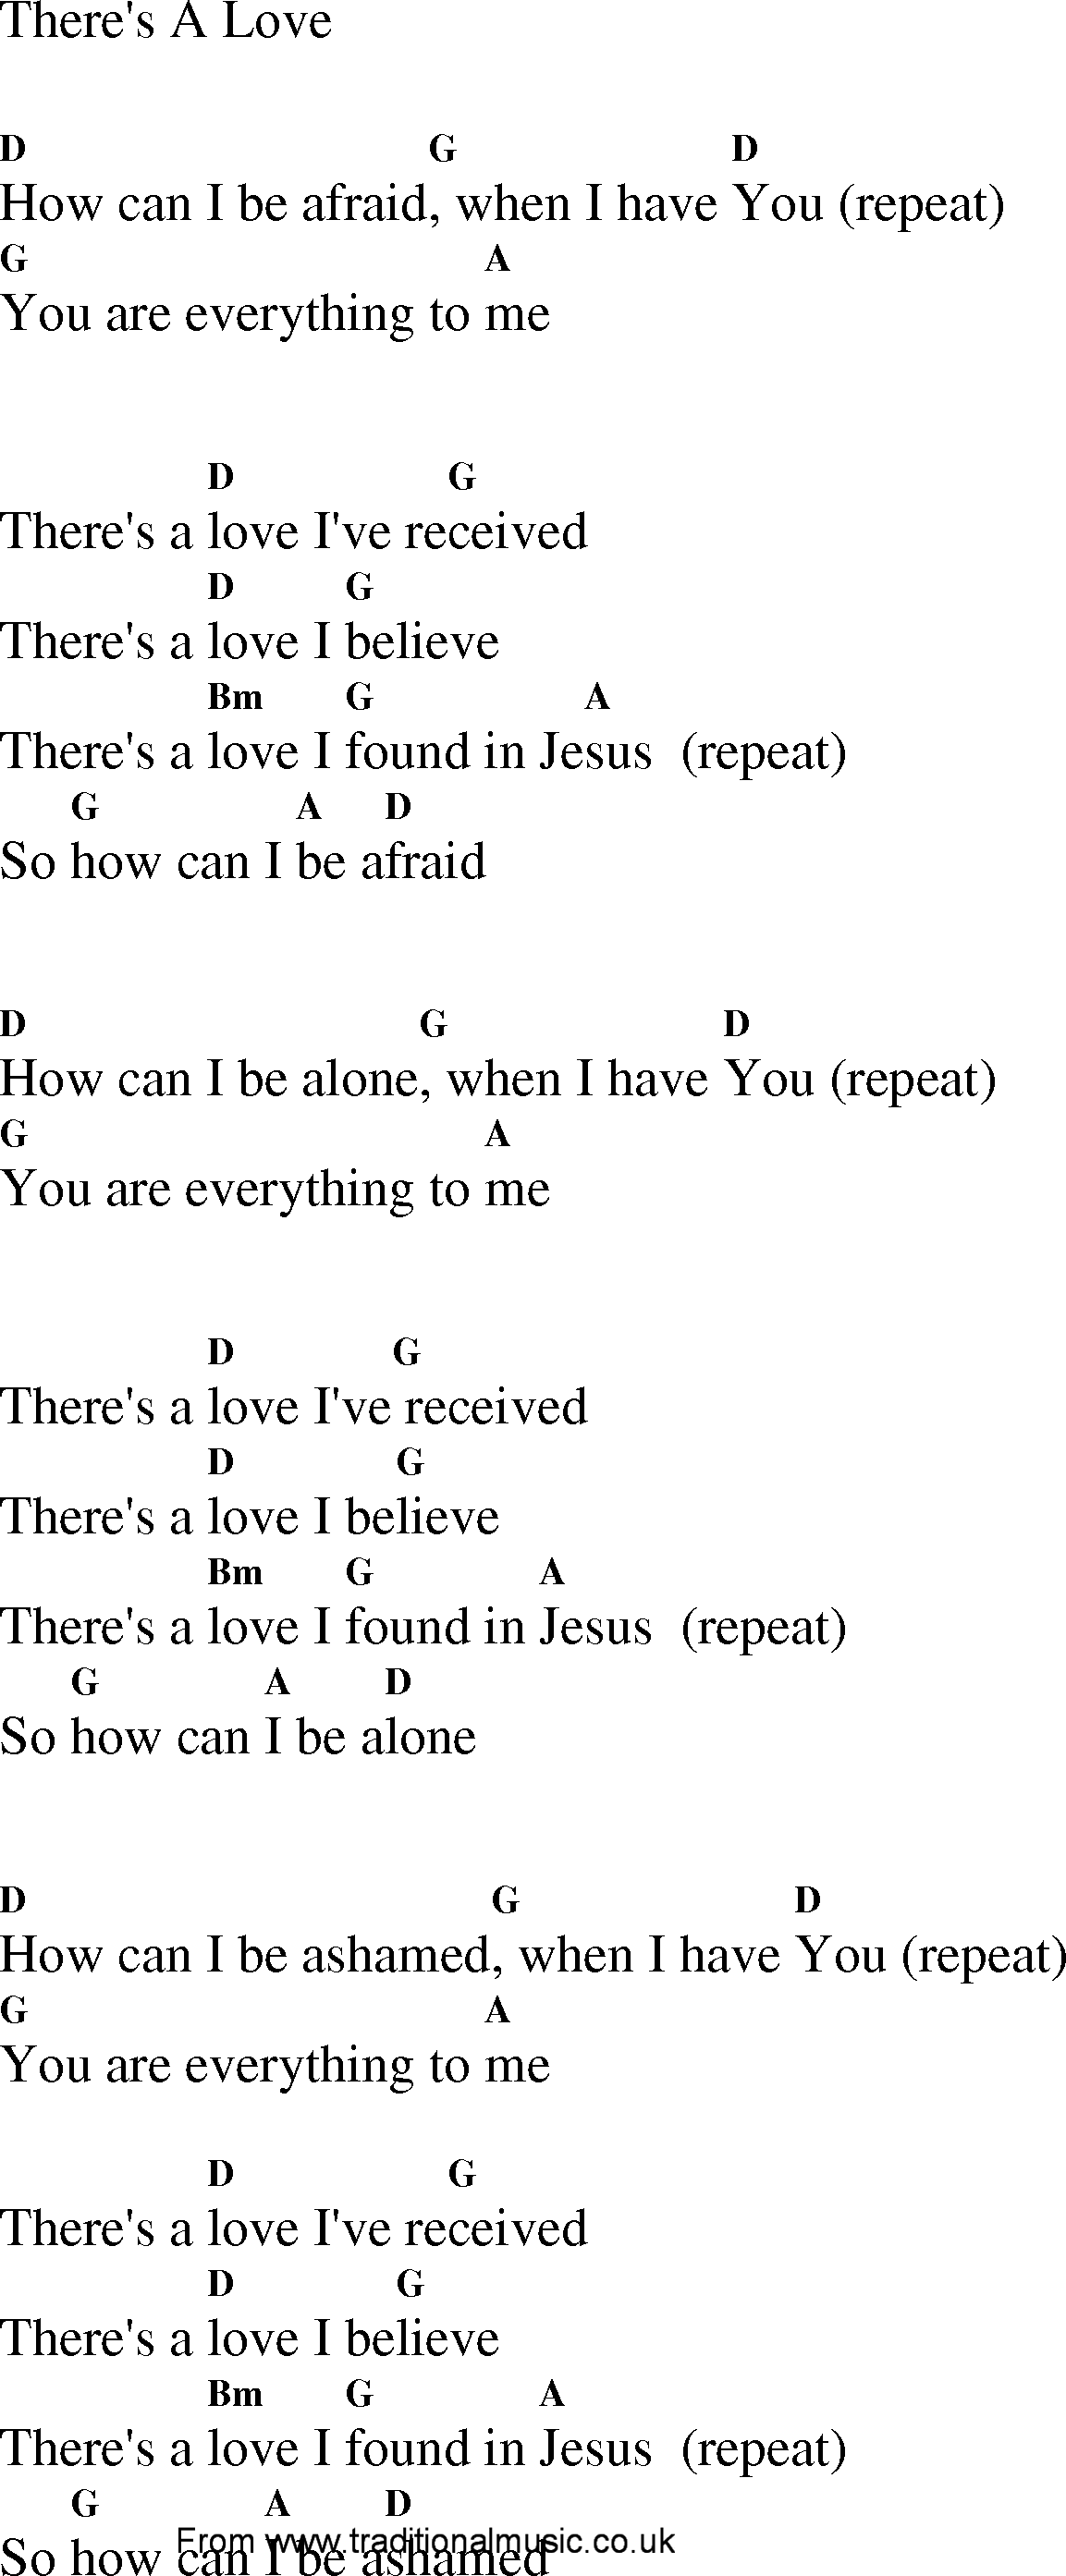 Gospel Song: theres_a_love, lyrics and chords.